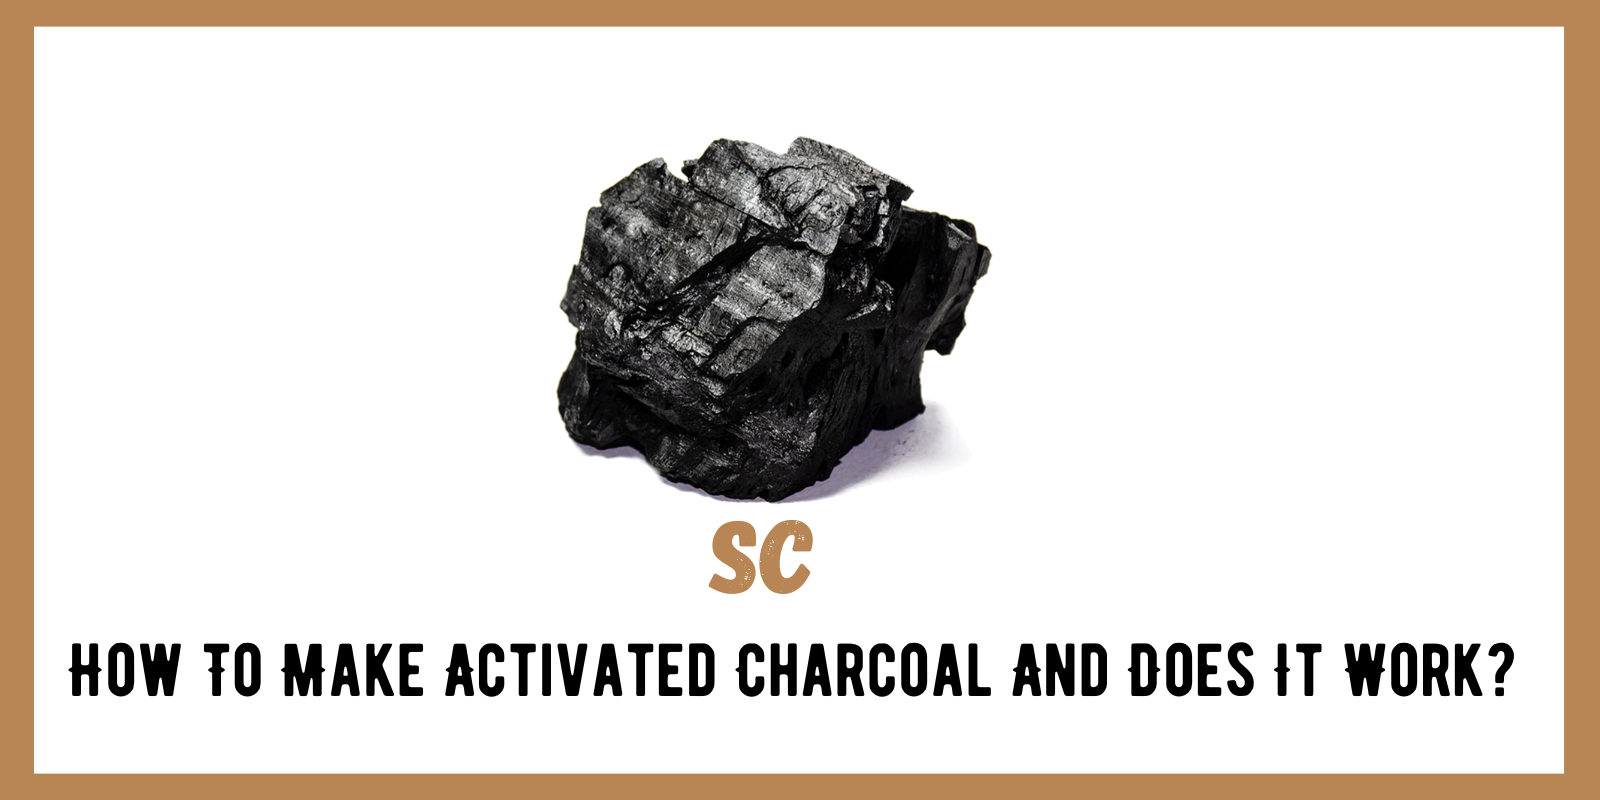 How To Make Activated Charcoal And Does It Work?